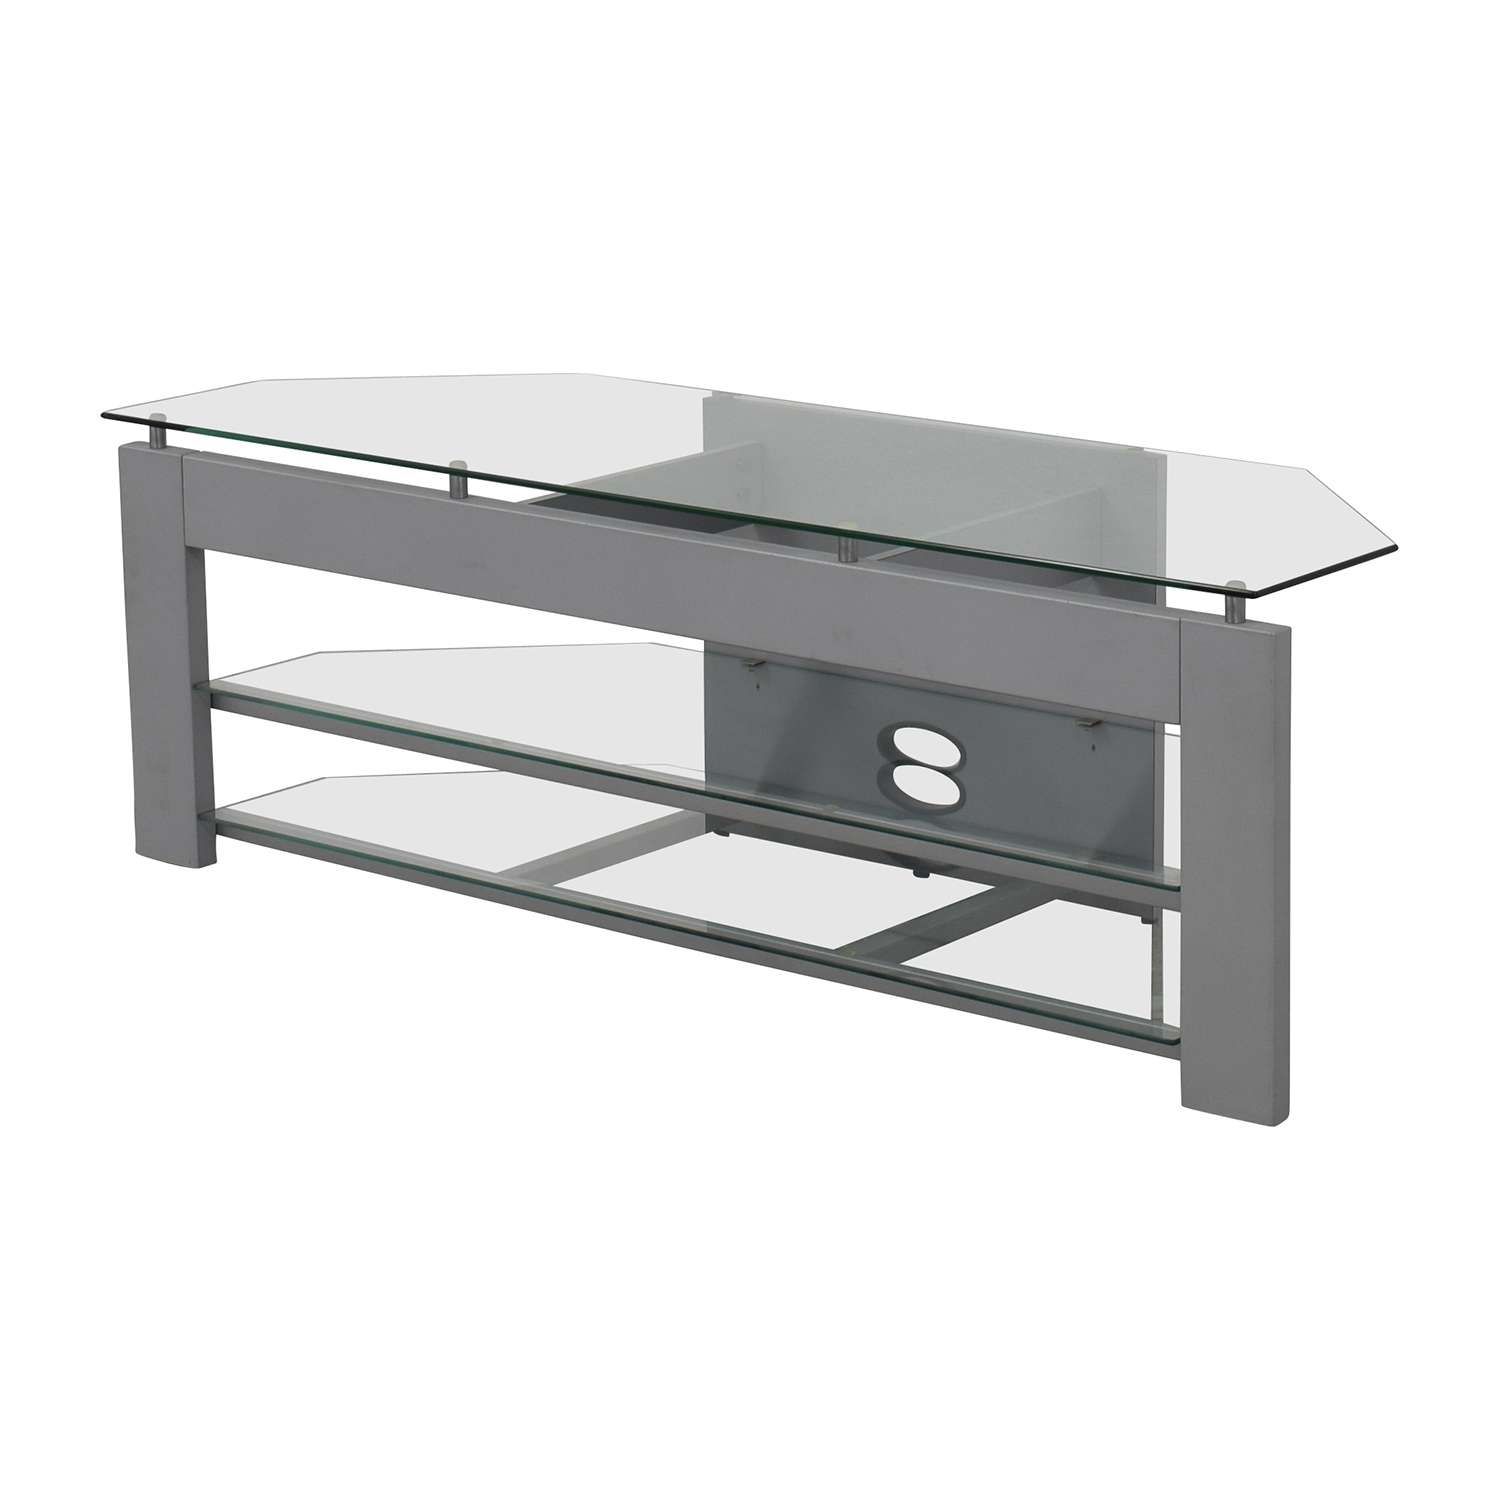 87% Off – Silver And Glass Tv Stand / Storage Within Silver Tv Stands (View 4 of 15)